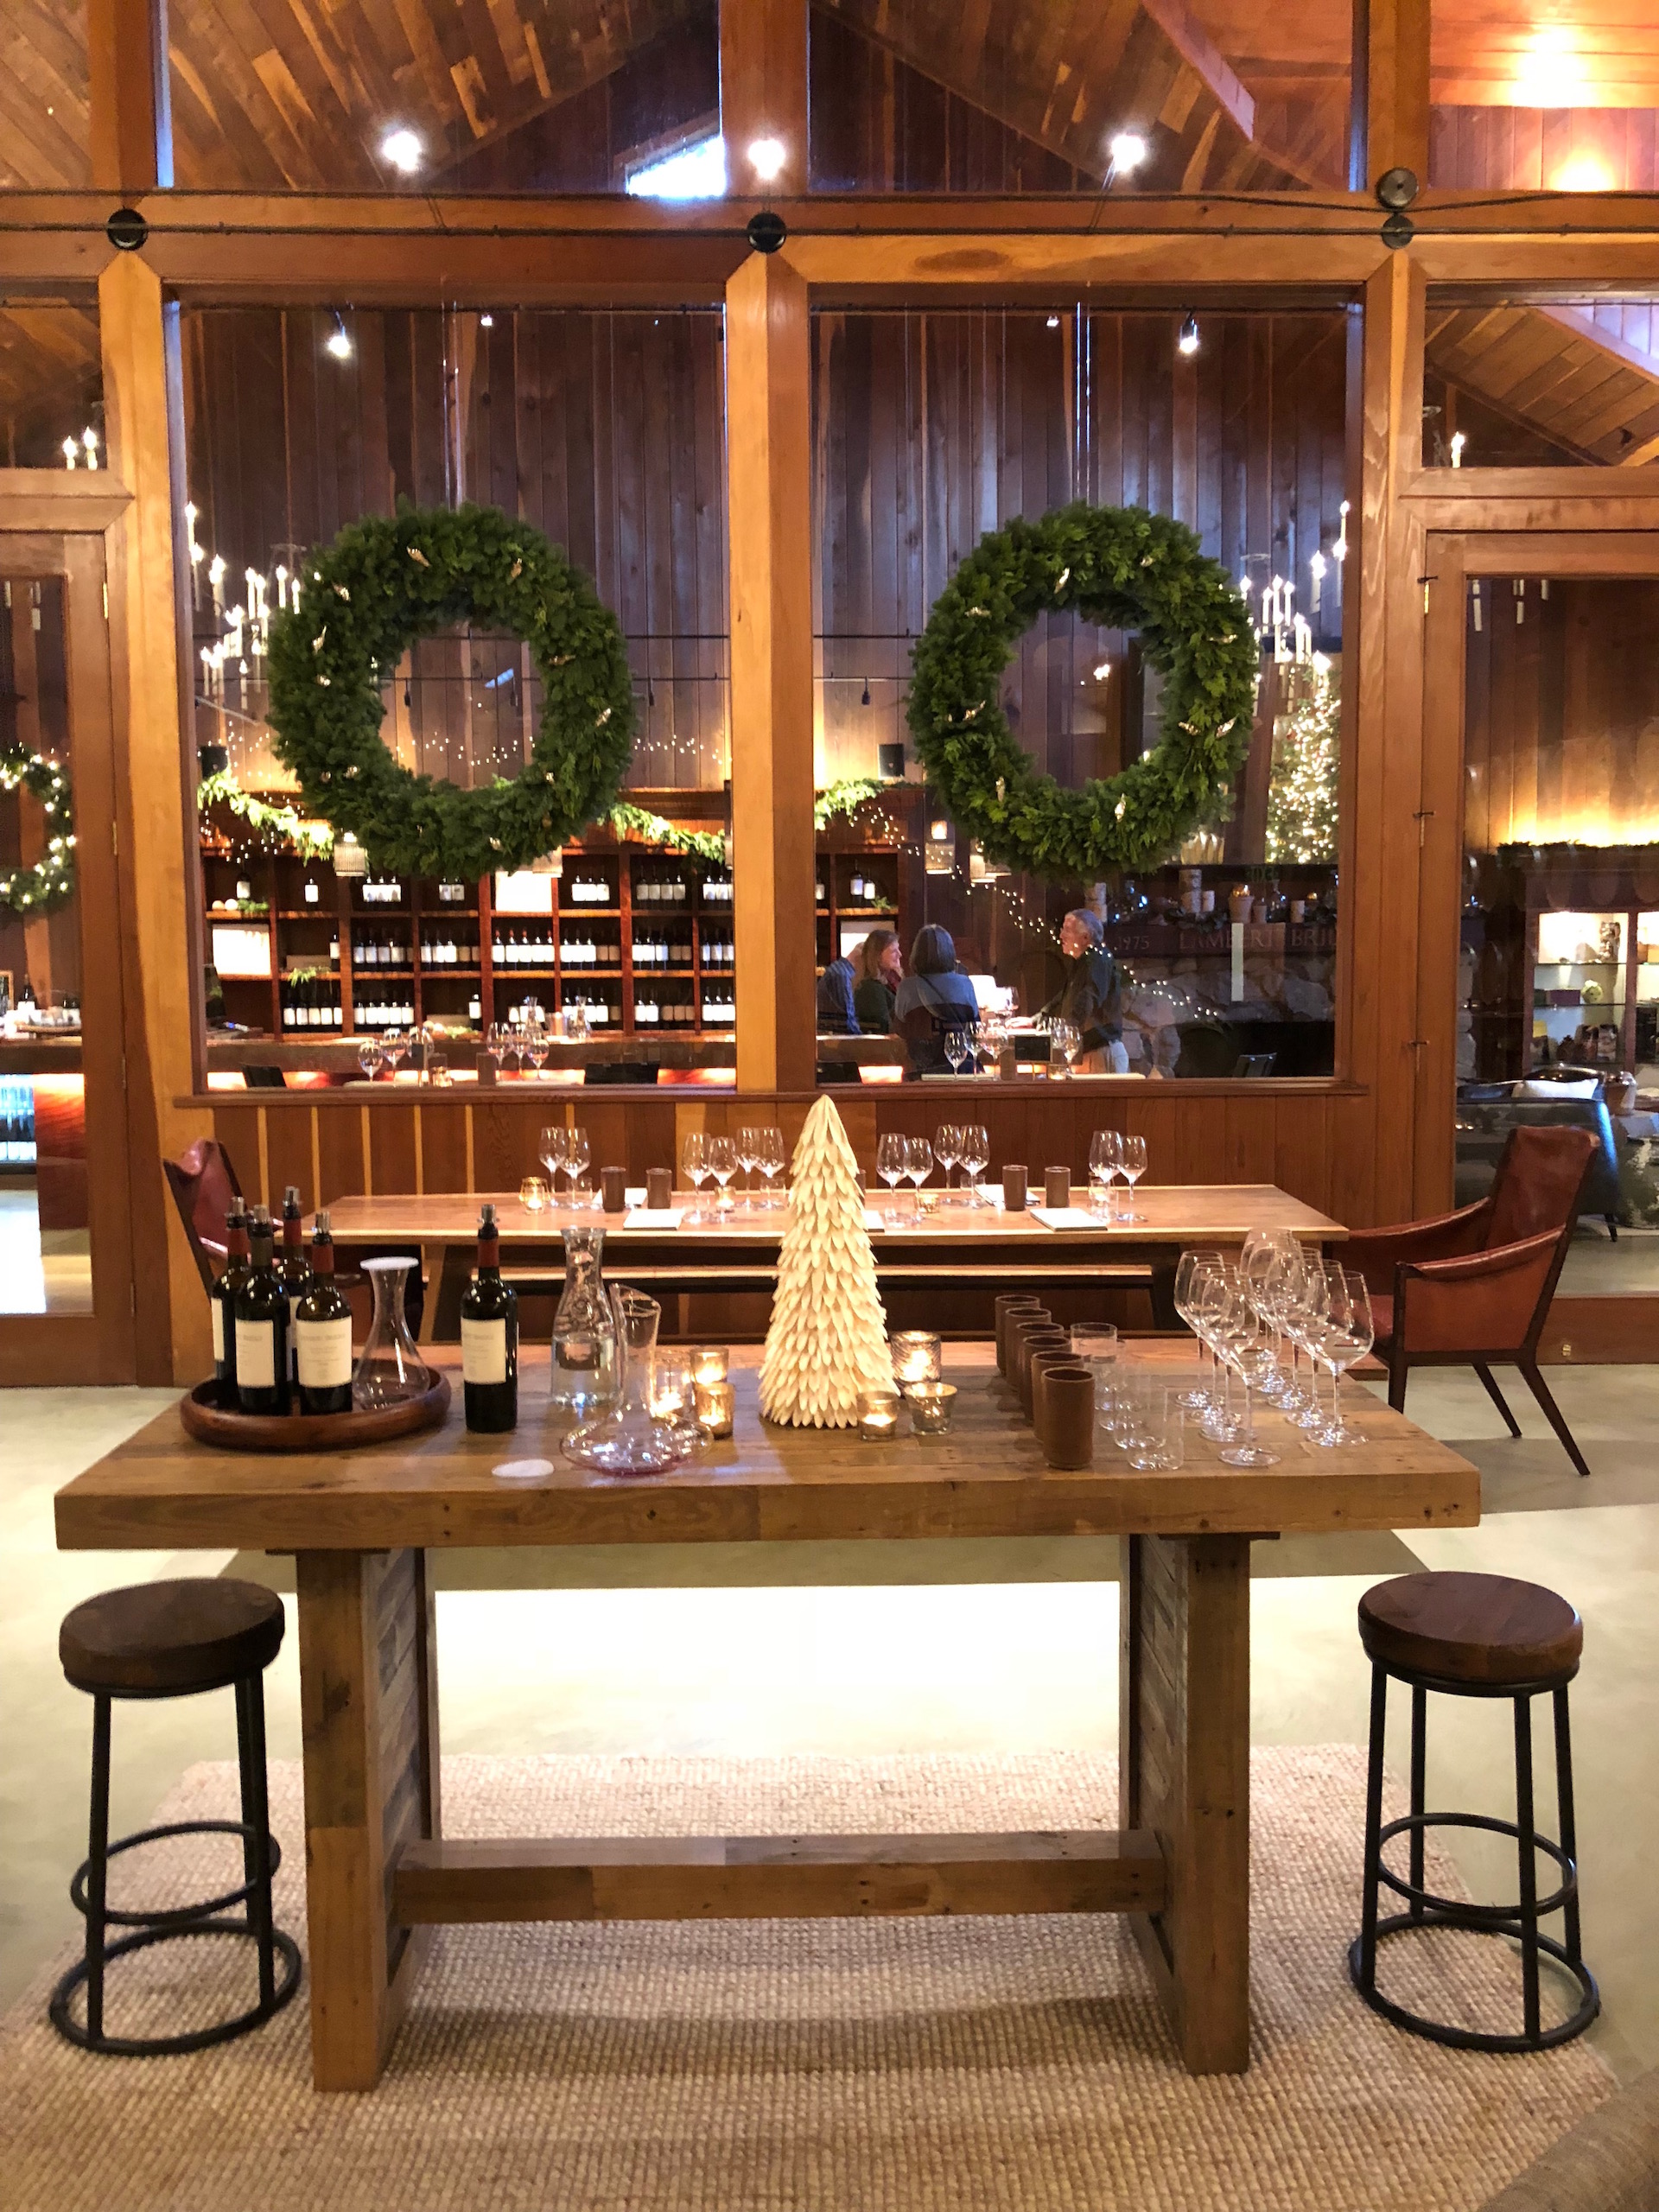 The spectacular and newly revamped Lambert Bridge Winery Redwood Barrel Room, all dressed up for the holidays